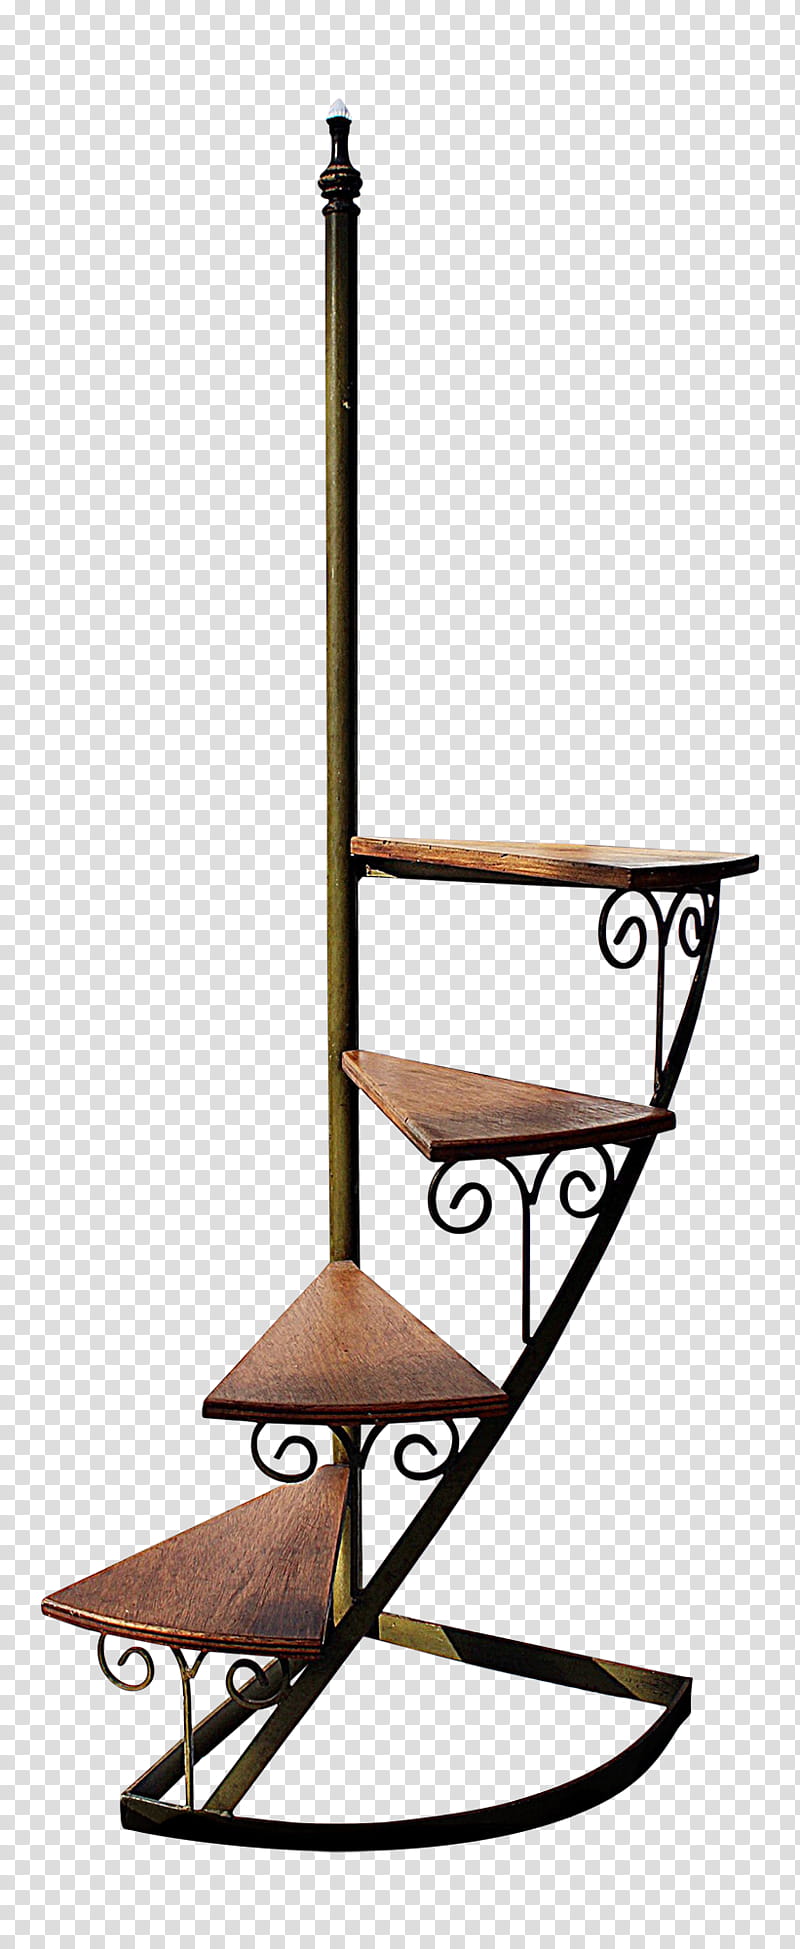 One Step Away, brown wooden spiral staircase art transparent background PNG clipart